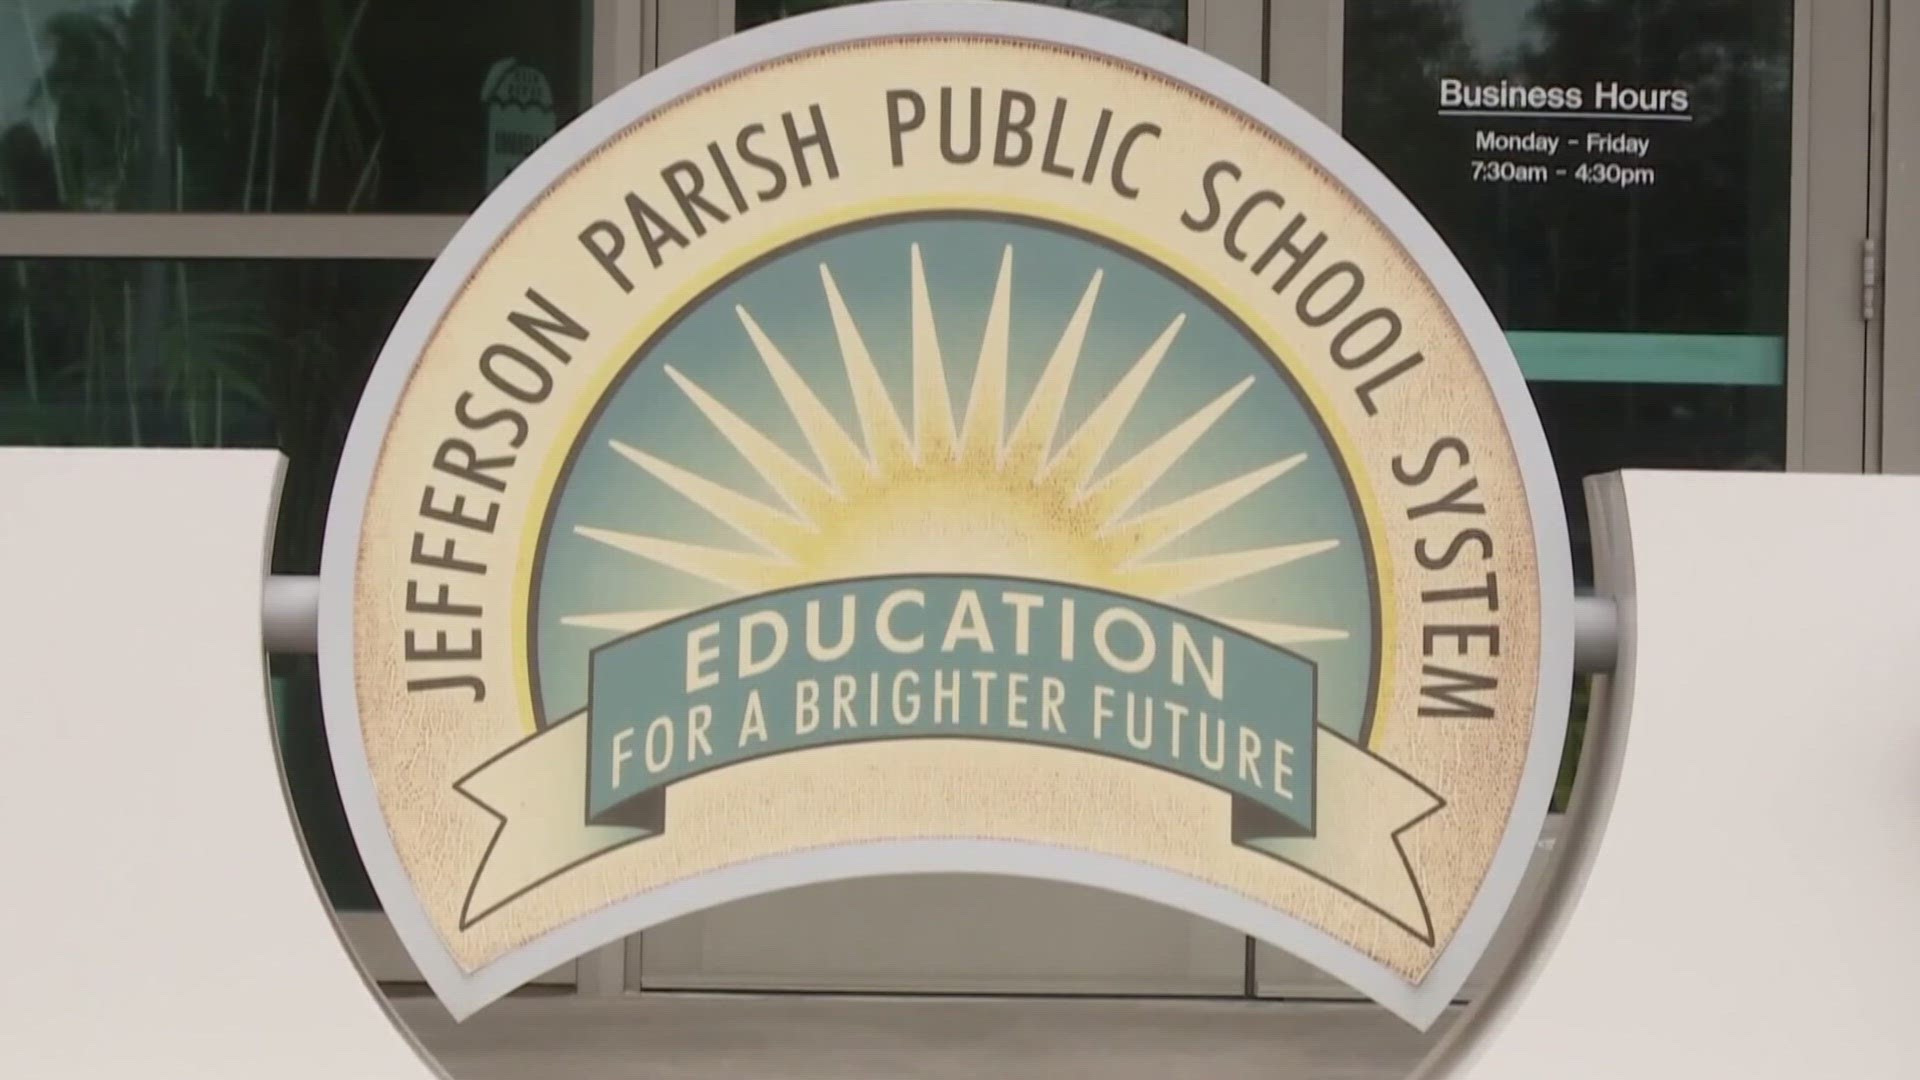 Jefferson Parish’s School Board said quote, “The early dismissal is necessary to get all students home safely before the eclipse.”